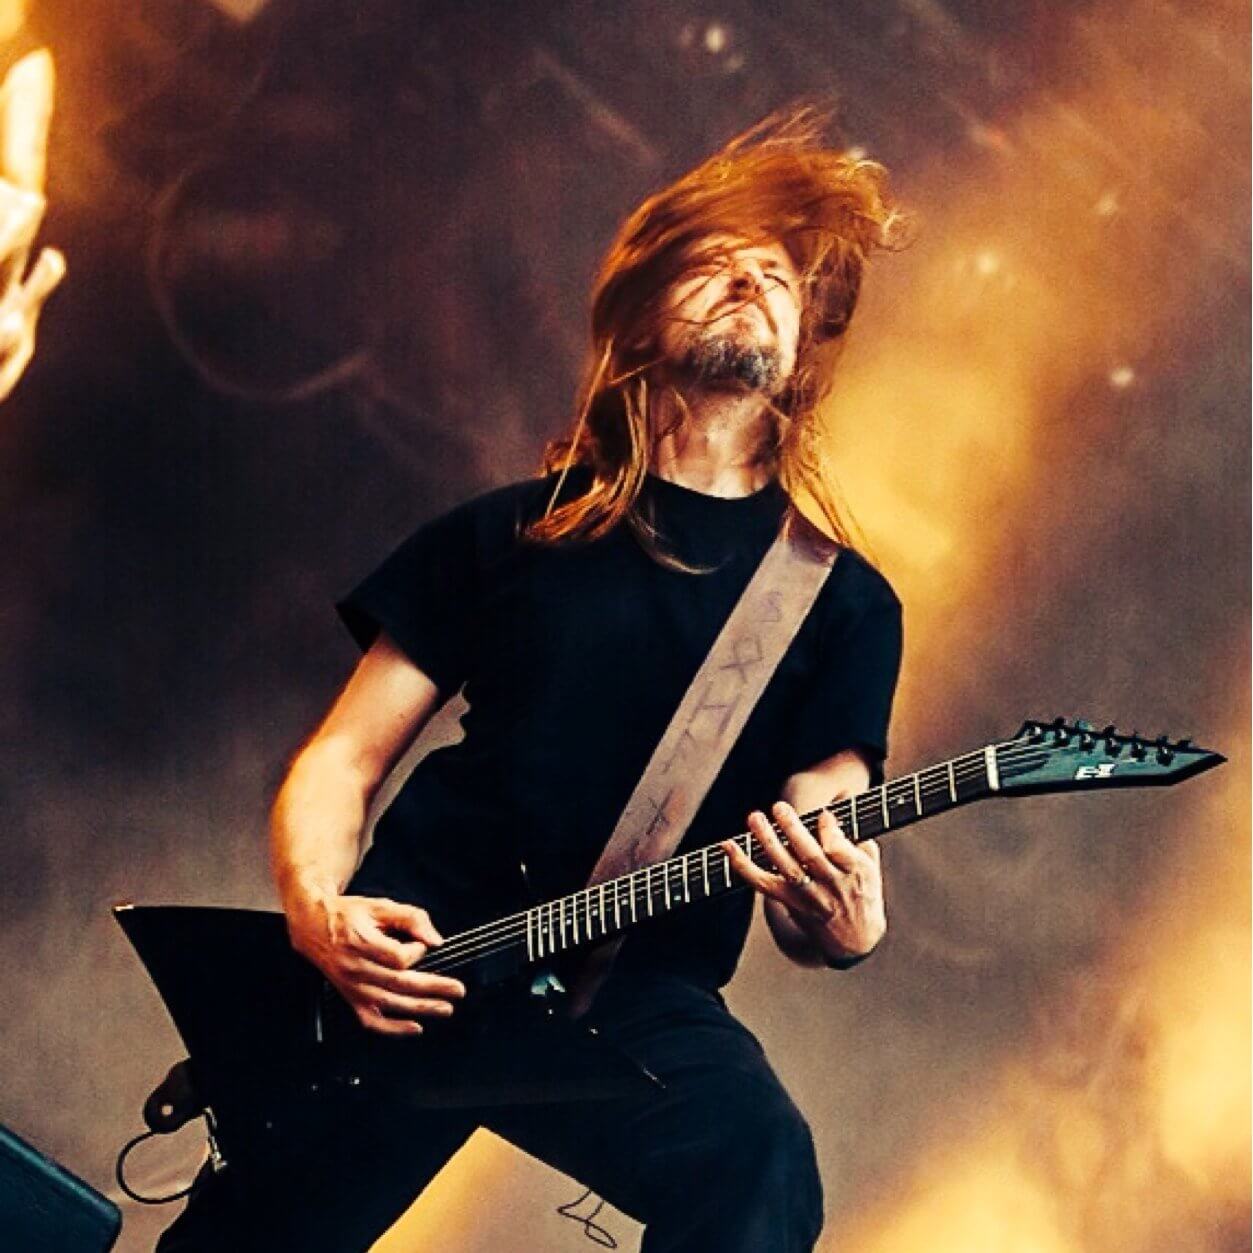 An Interview With Johan Soderberg Amon Amarth S Powerful Guitarist Sentinel Daily Amon amarth (battle field) fabric poster. an interview with johan soderberg